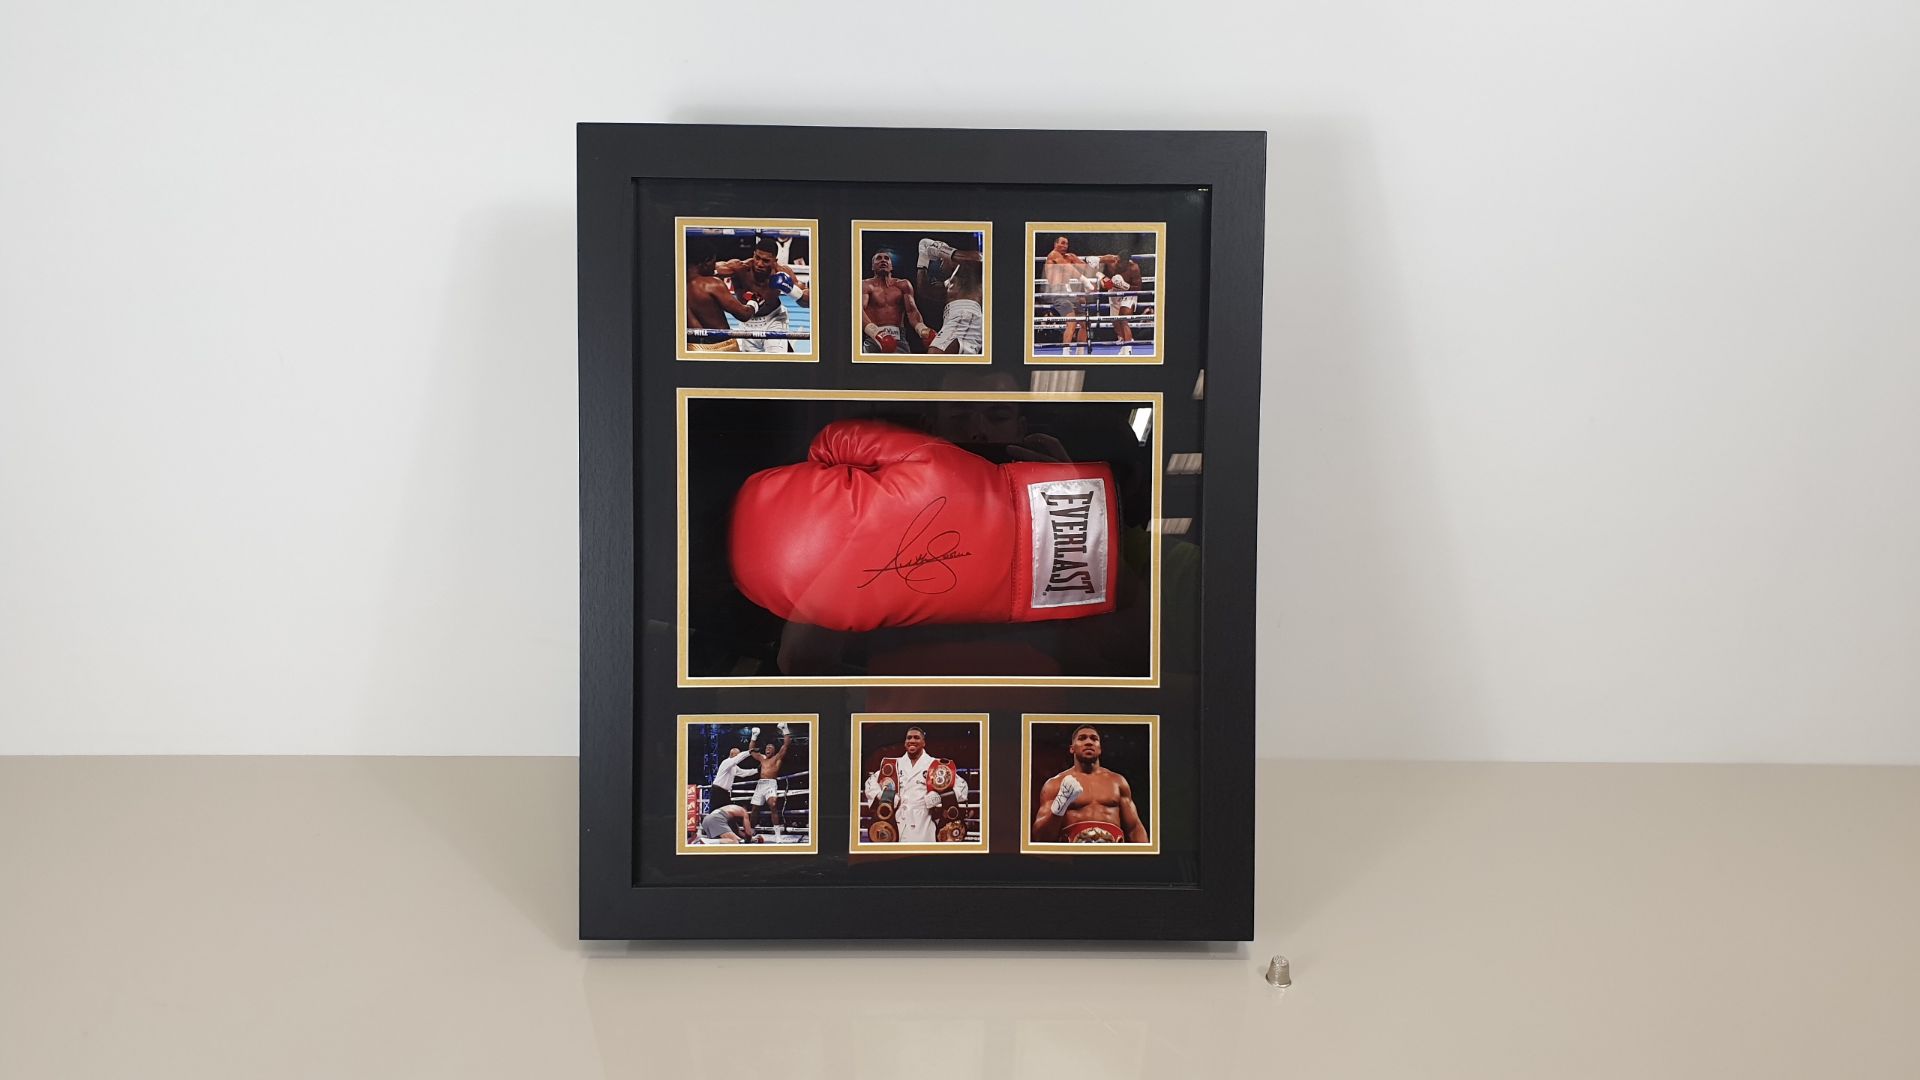 ANTHONY JOSHUA PERSONALLY SIGNED GLOVE IN LIGHT UP DISPLAY CASE AND PHOTOS - GOOD CONDITION WITH